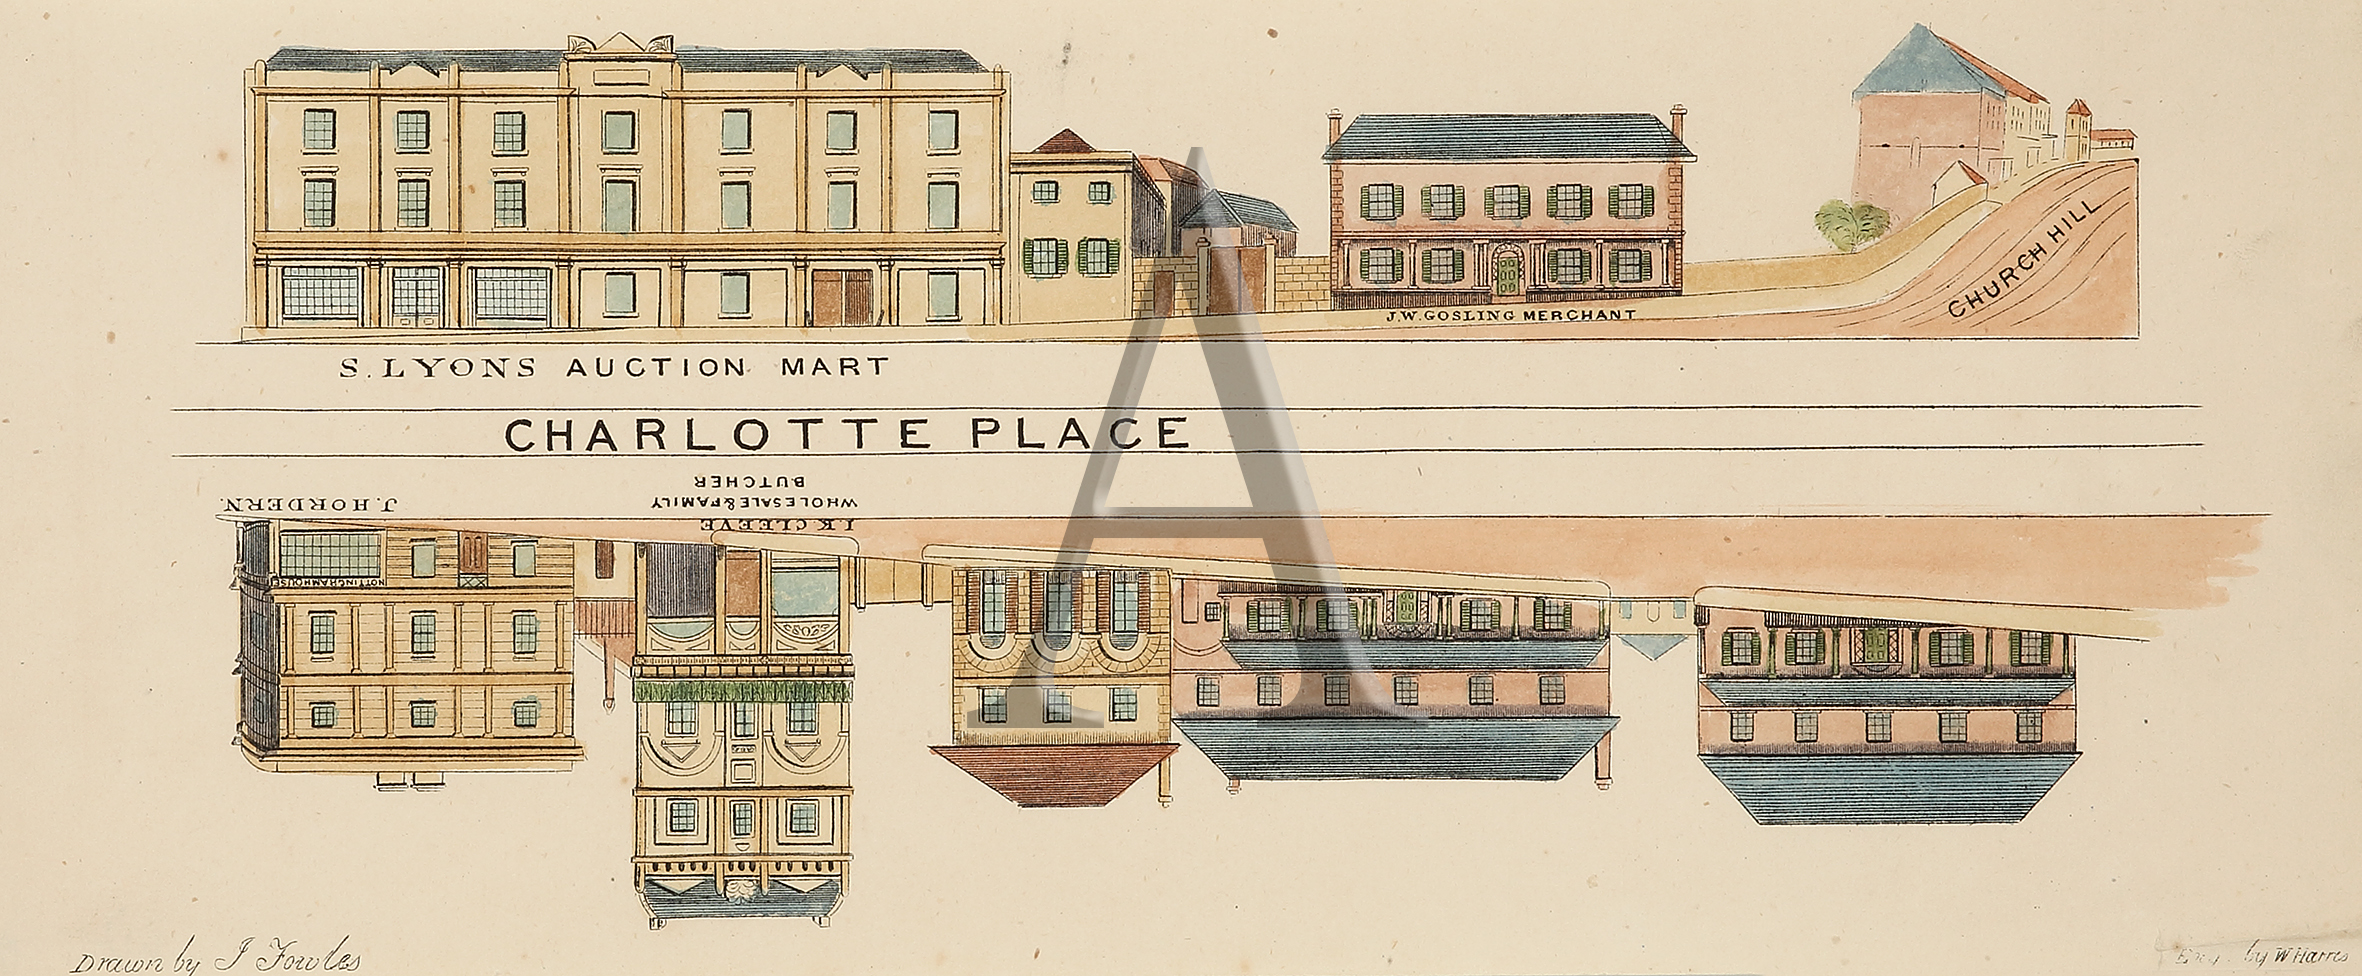 Charlotte Place - Antique Print from 1878